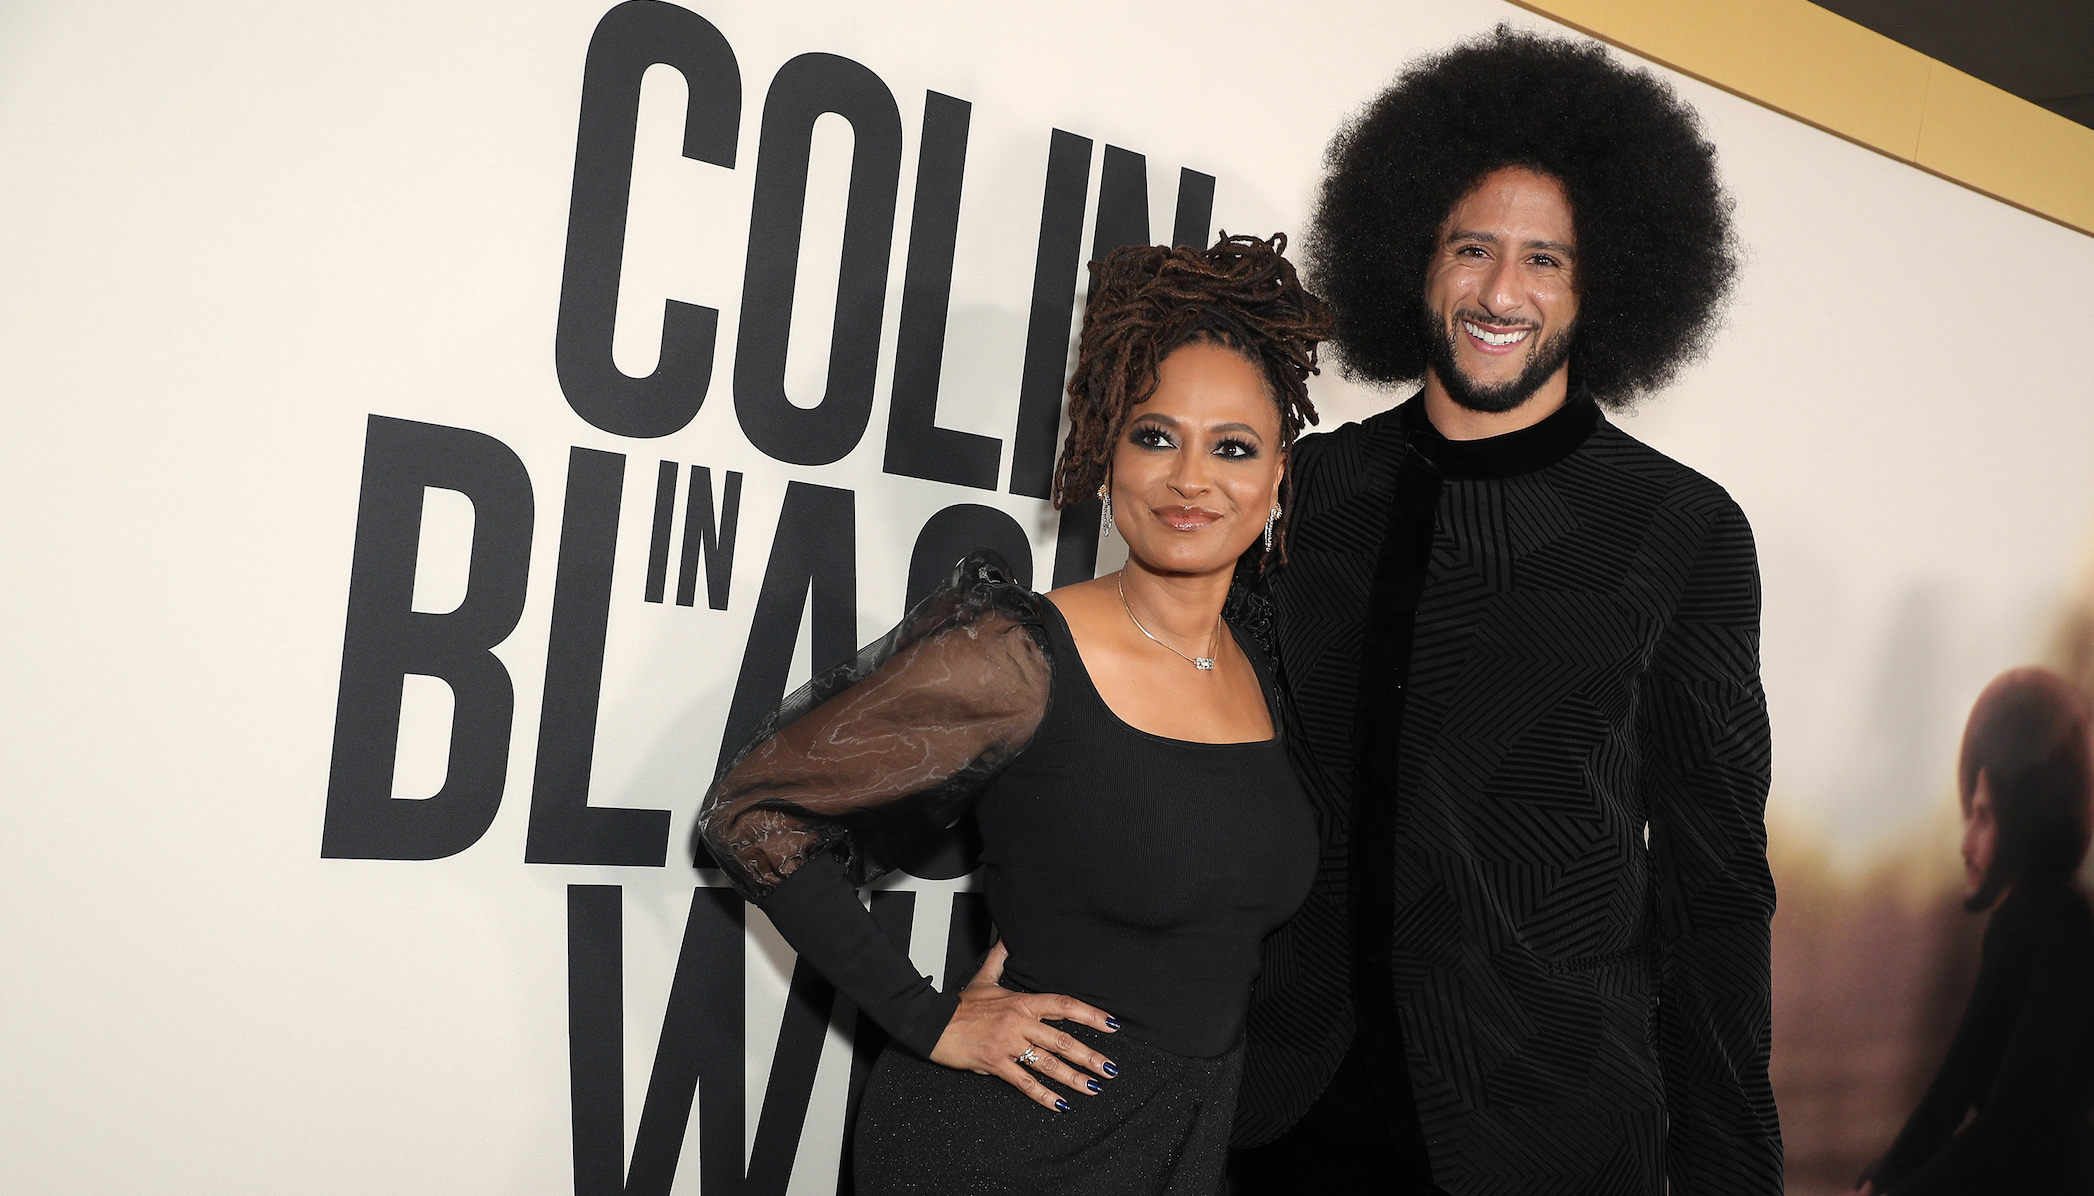 Colin in Black and White Ava DuVernay and Directors Talk Black Masculinity image